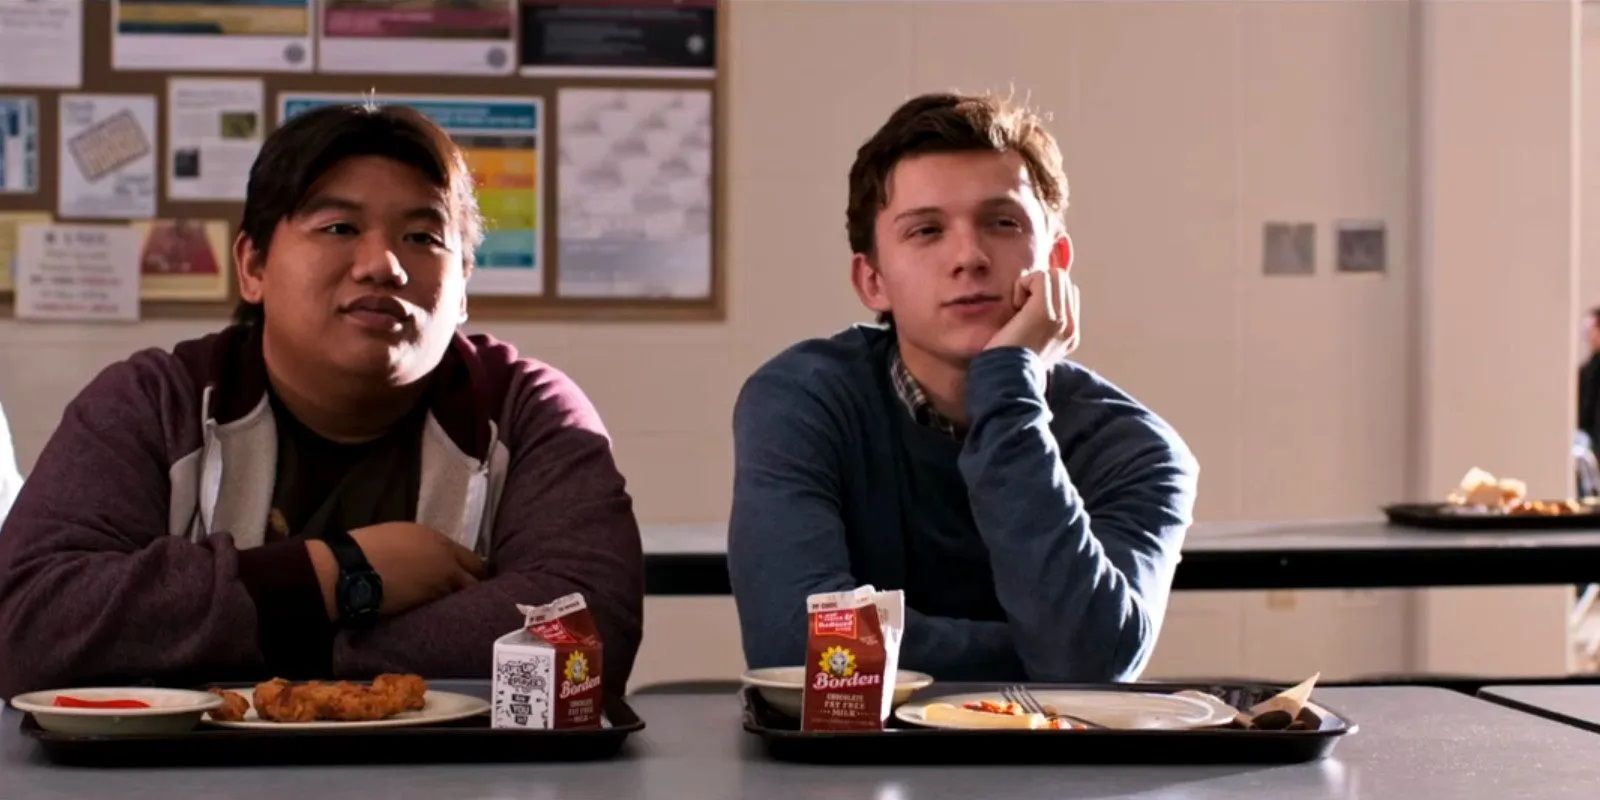 Ned and Peter at the lunch table